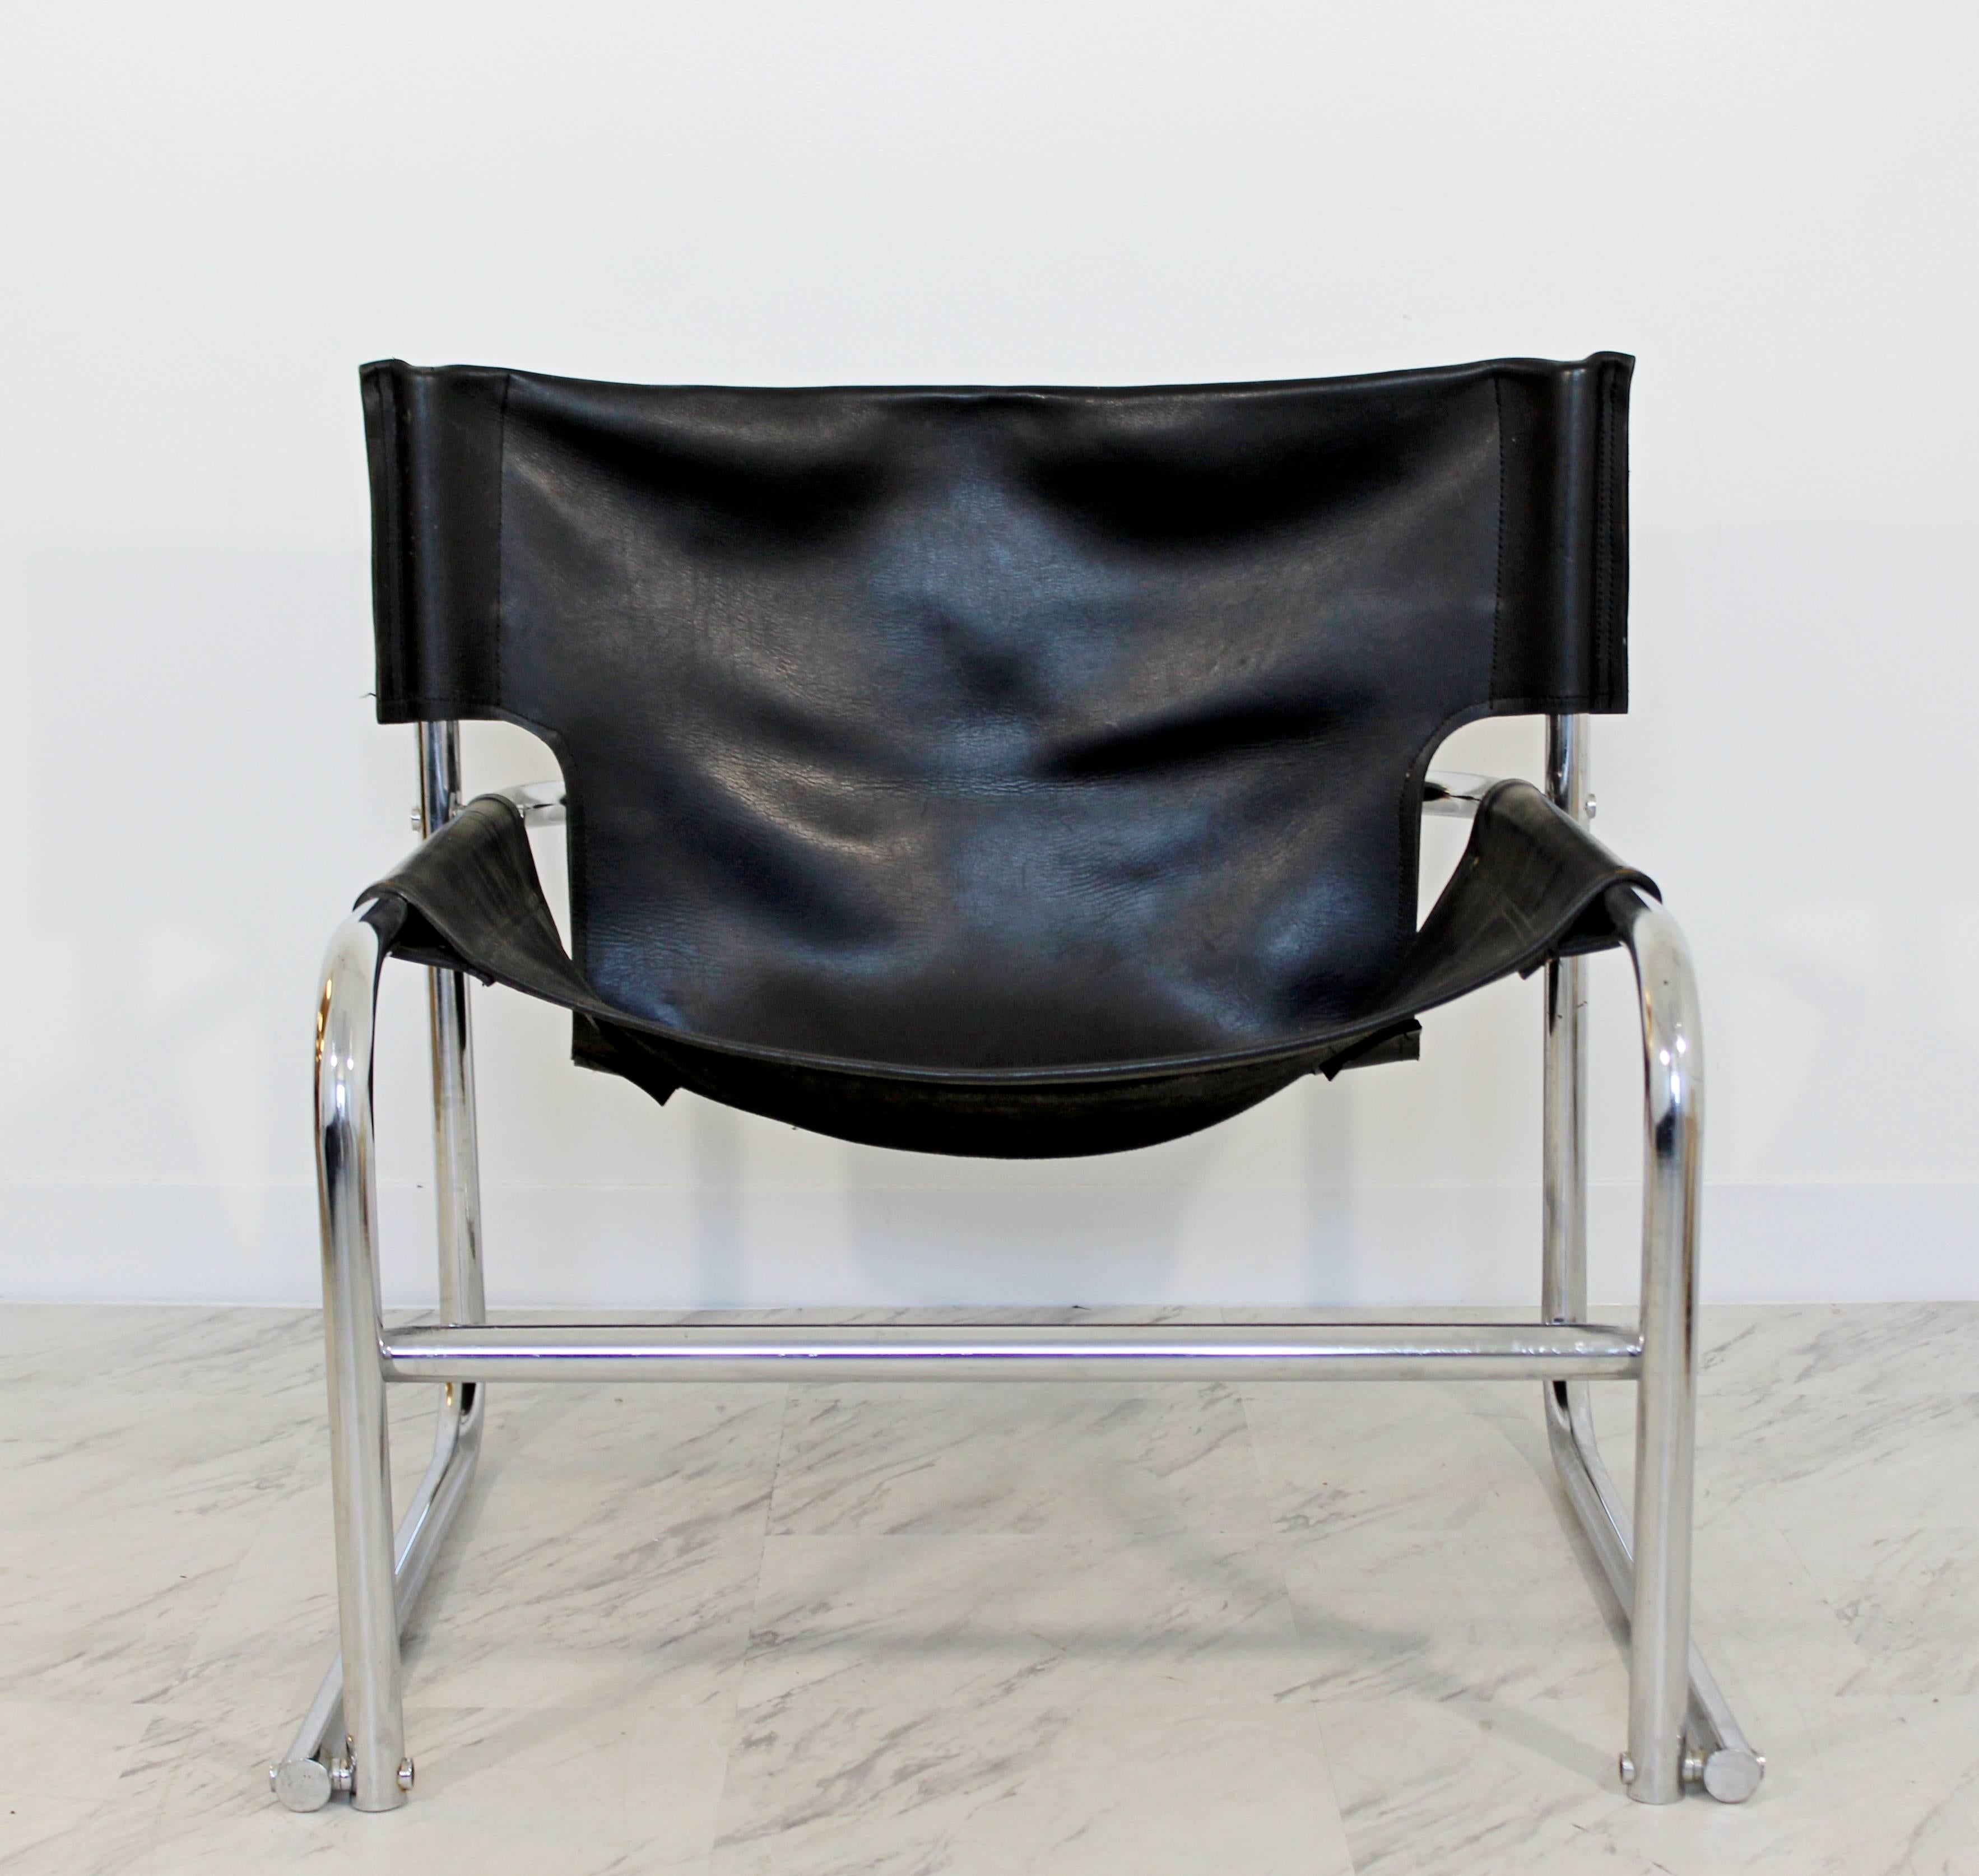 For your consideration is a magnificent, tubular chrome sling armchair, with black leather upholstery, by Rodney Kinsman, circa the 1960s. In very good condition. The dimensions are 30.5